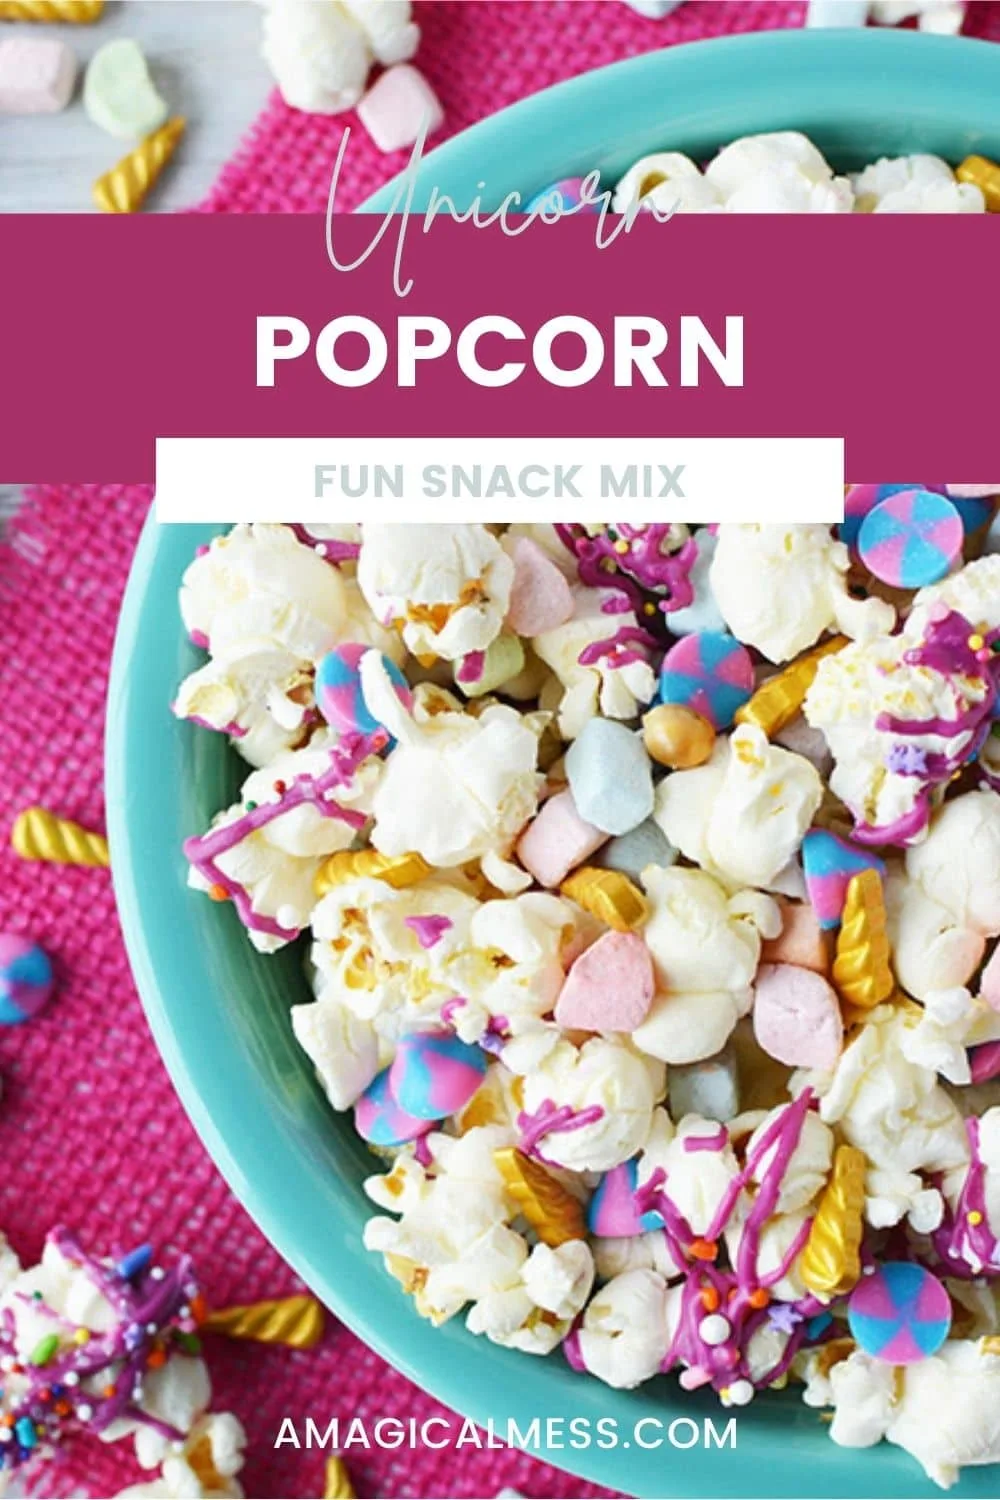 Blue bowl full of unicorn popcorn with candies.